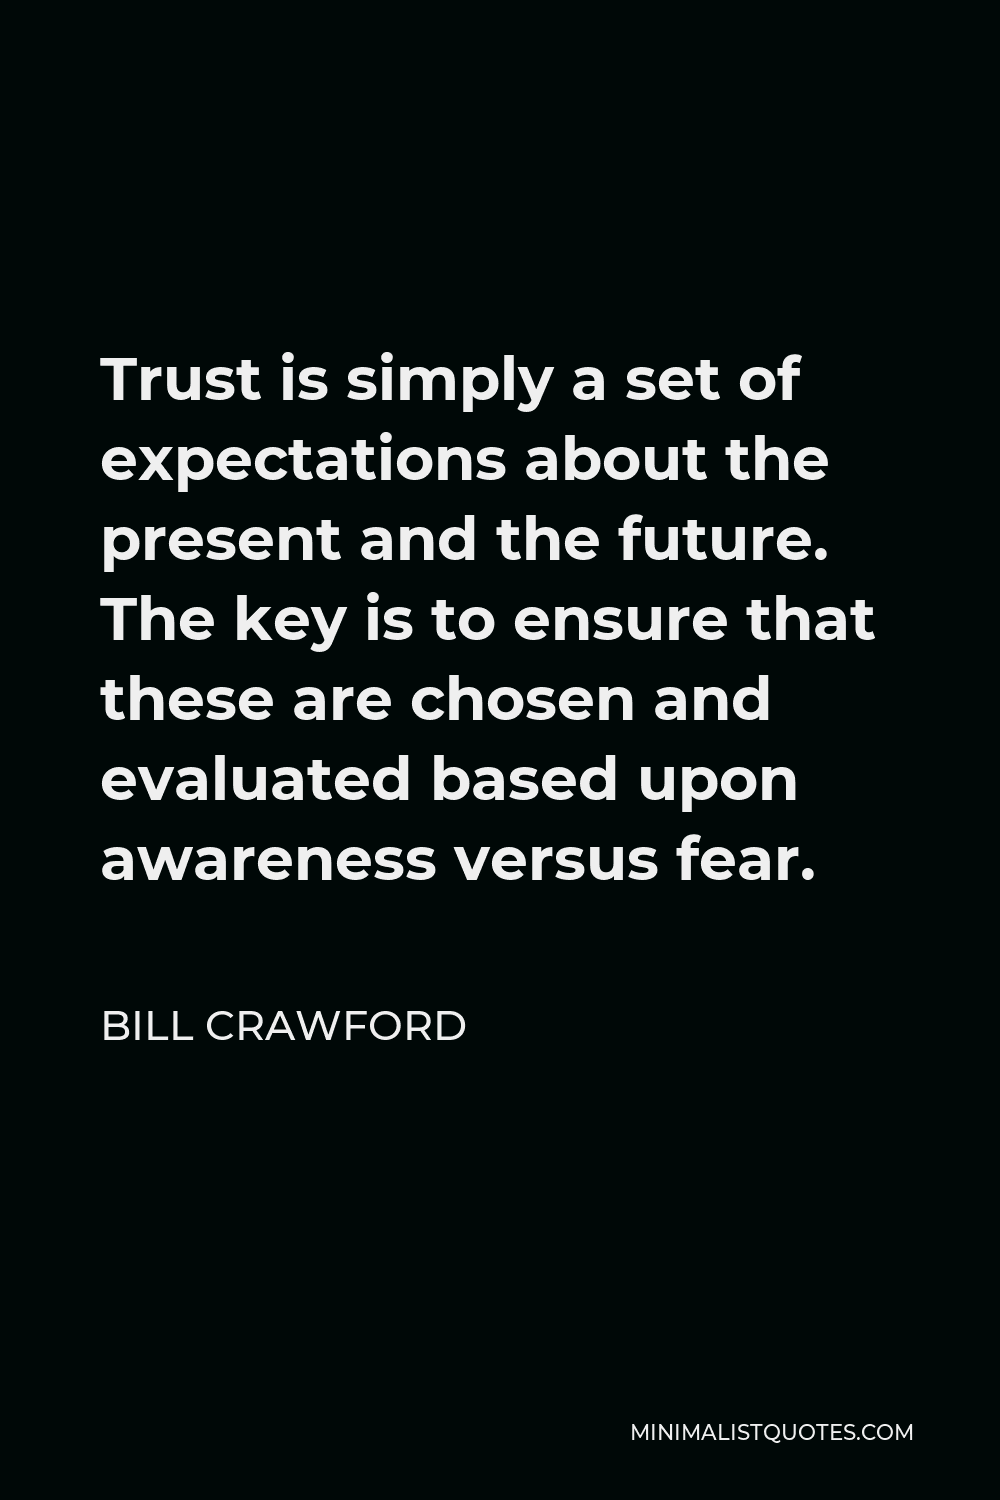 Bill Crawford Quote - Trust is simply a set of expectations about the present and the future. The key is to ensure that these are chosen and evaluated based upon awareness versus fear.